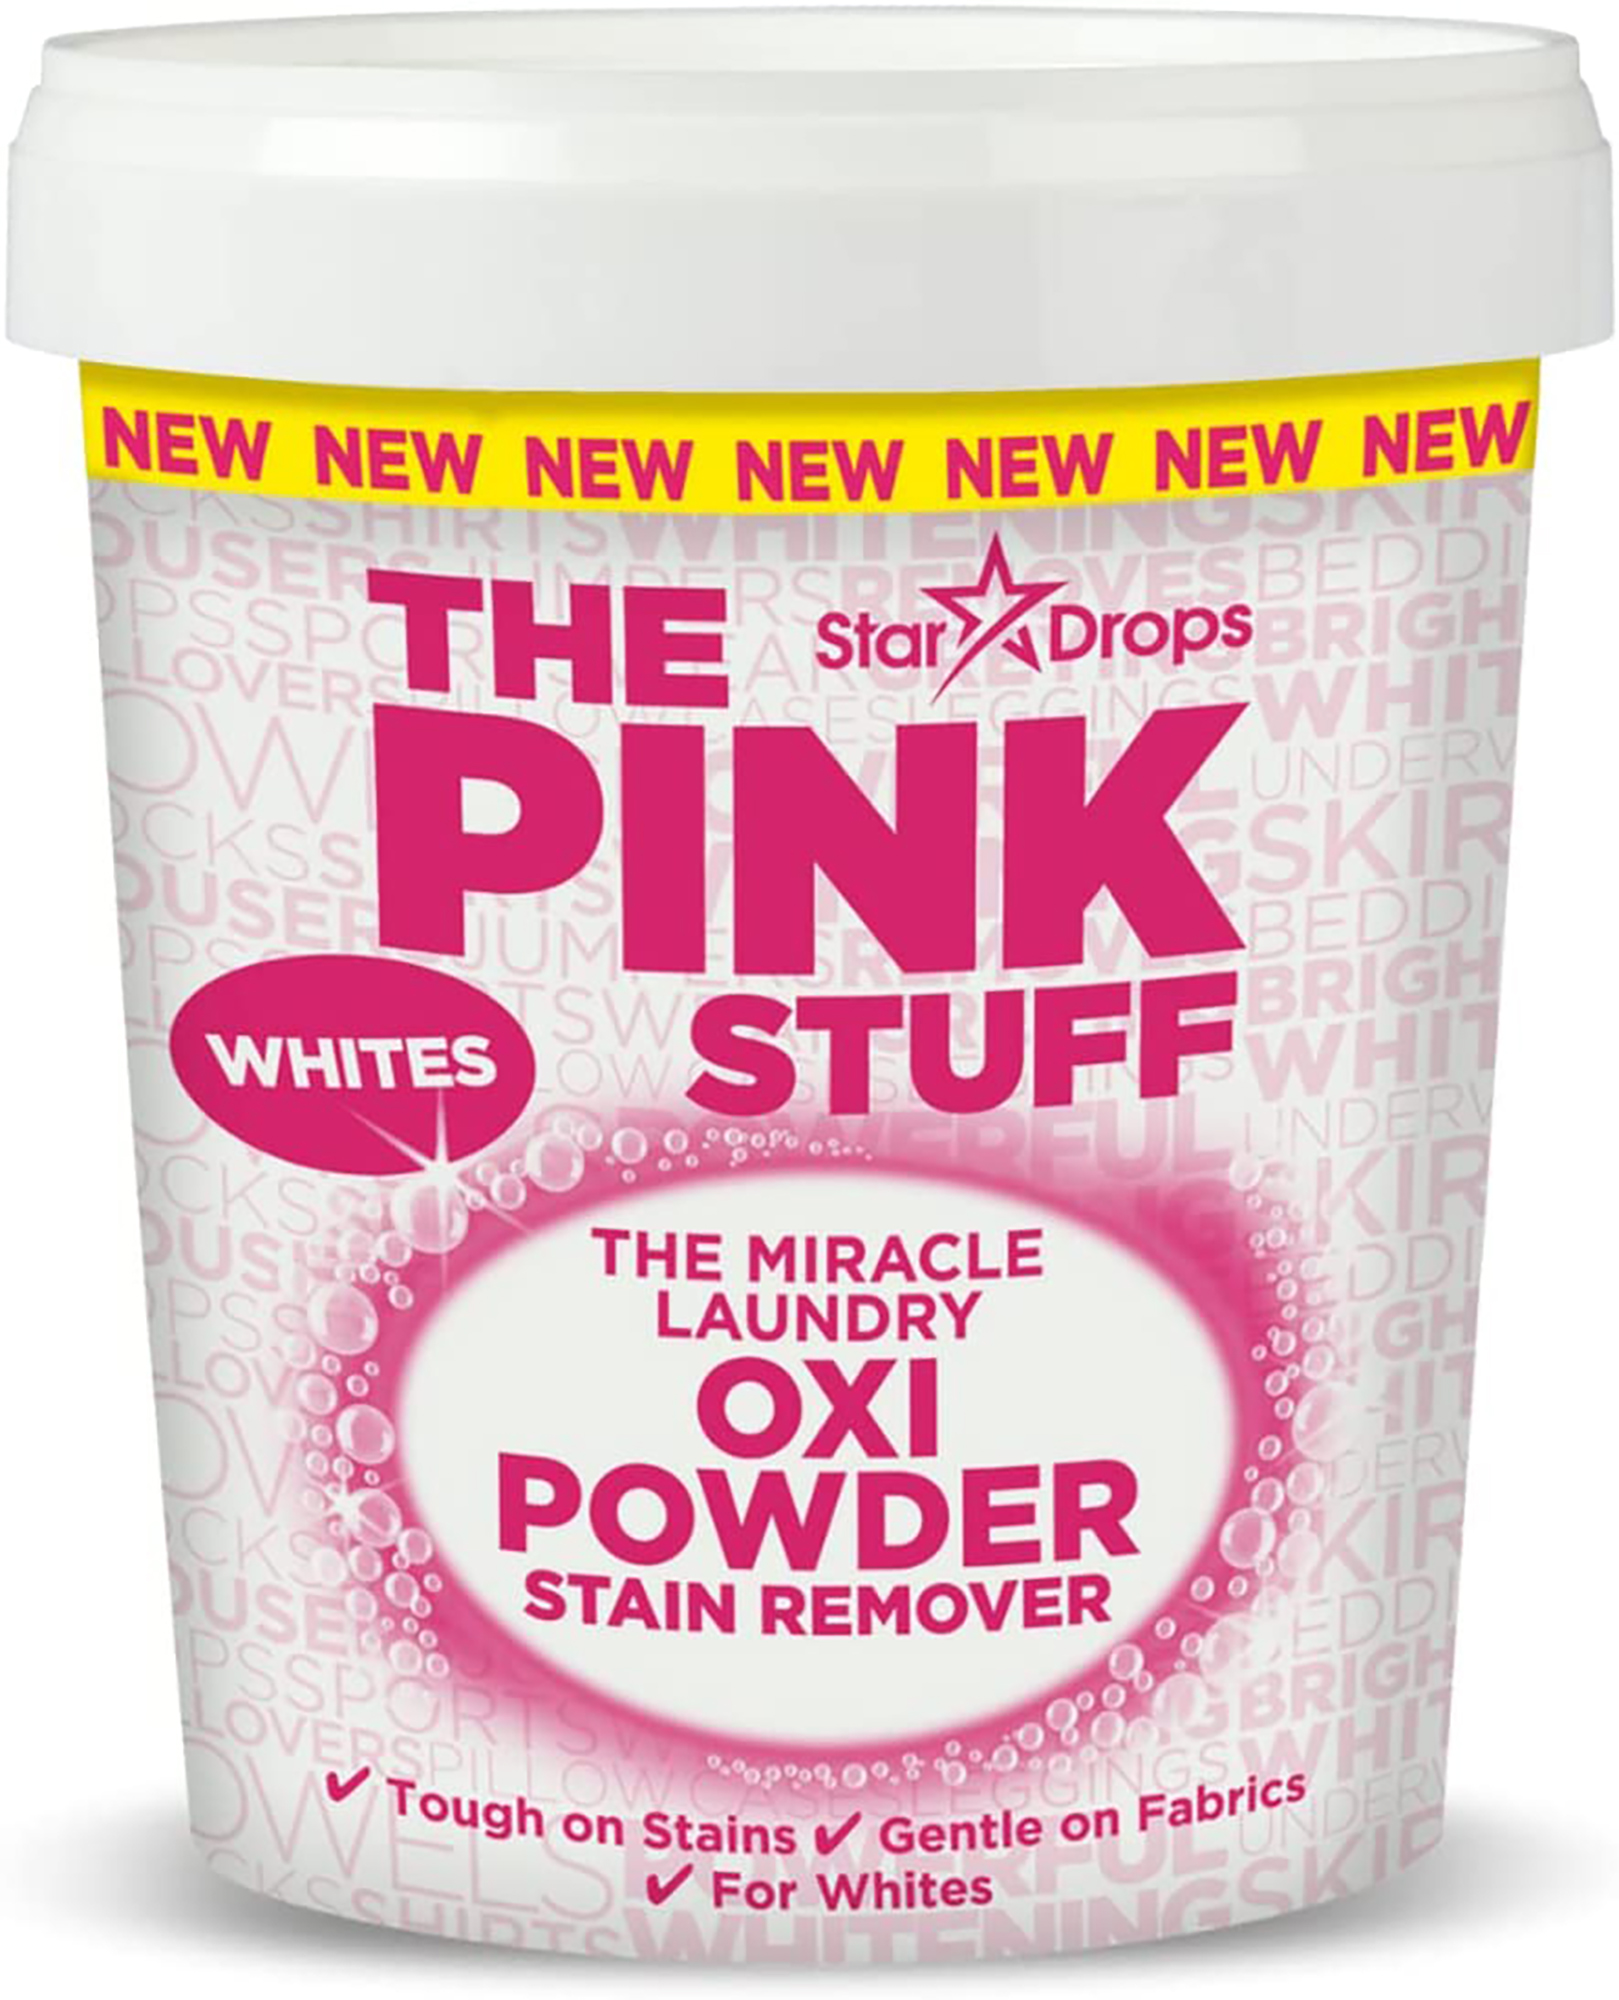 https://lyko.com/globalassets/product-images/the-pink-stuff-the-miracle-laundry-oxi-powder-stain-remover-whites-1200g-3278-108-1200_1.jpg?ref=57F2B20FFD